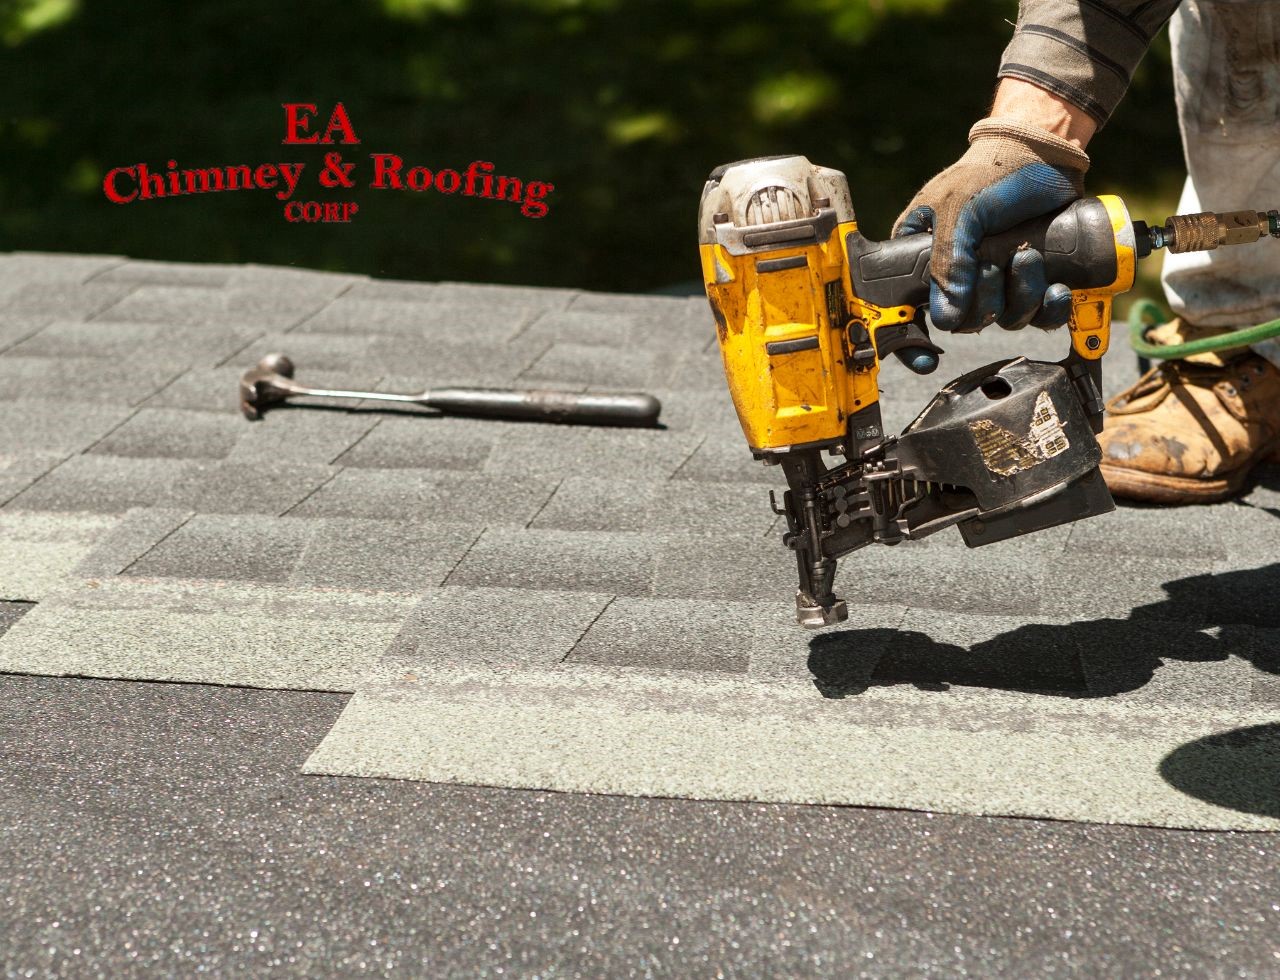 Contact EA Chimney & Roofing to get professional roofing services